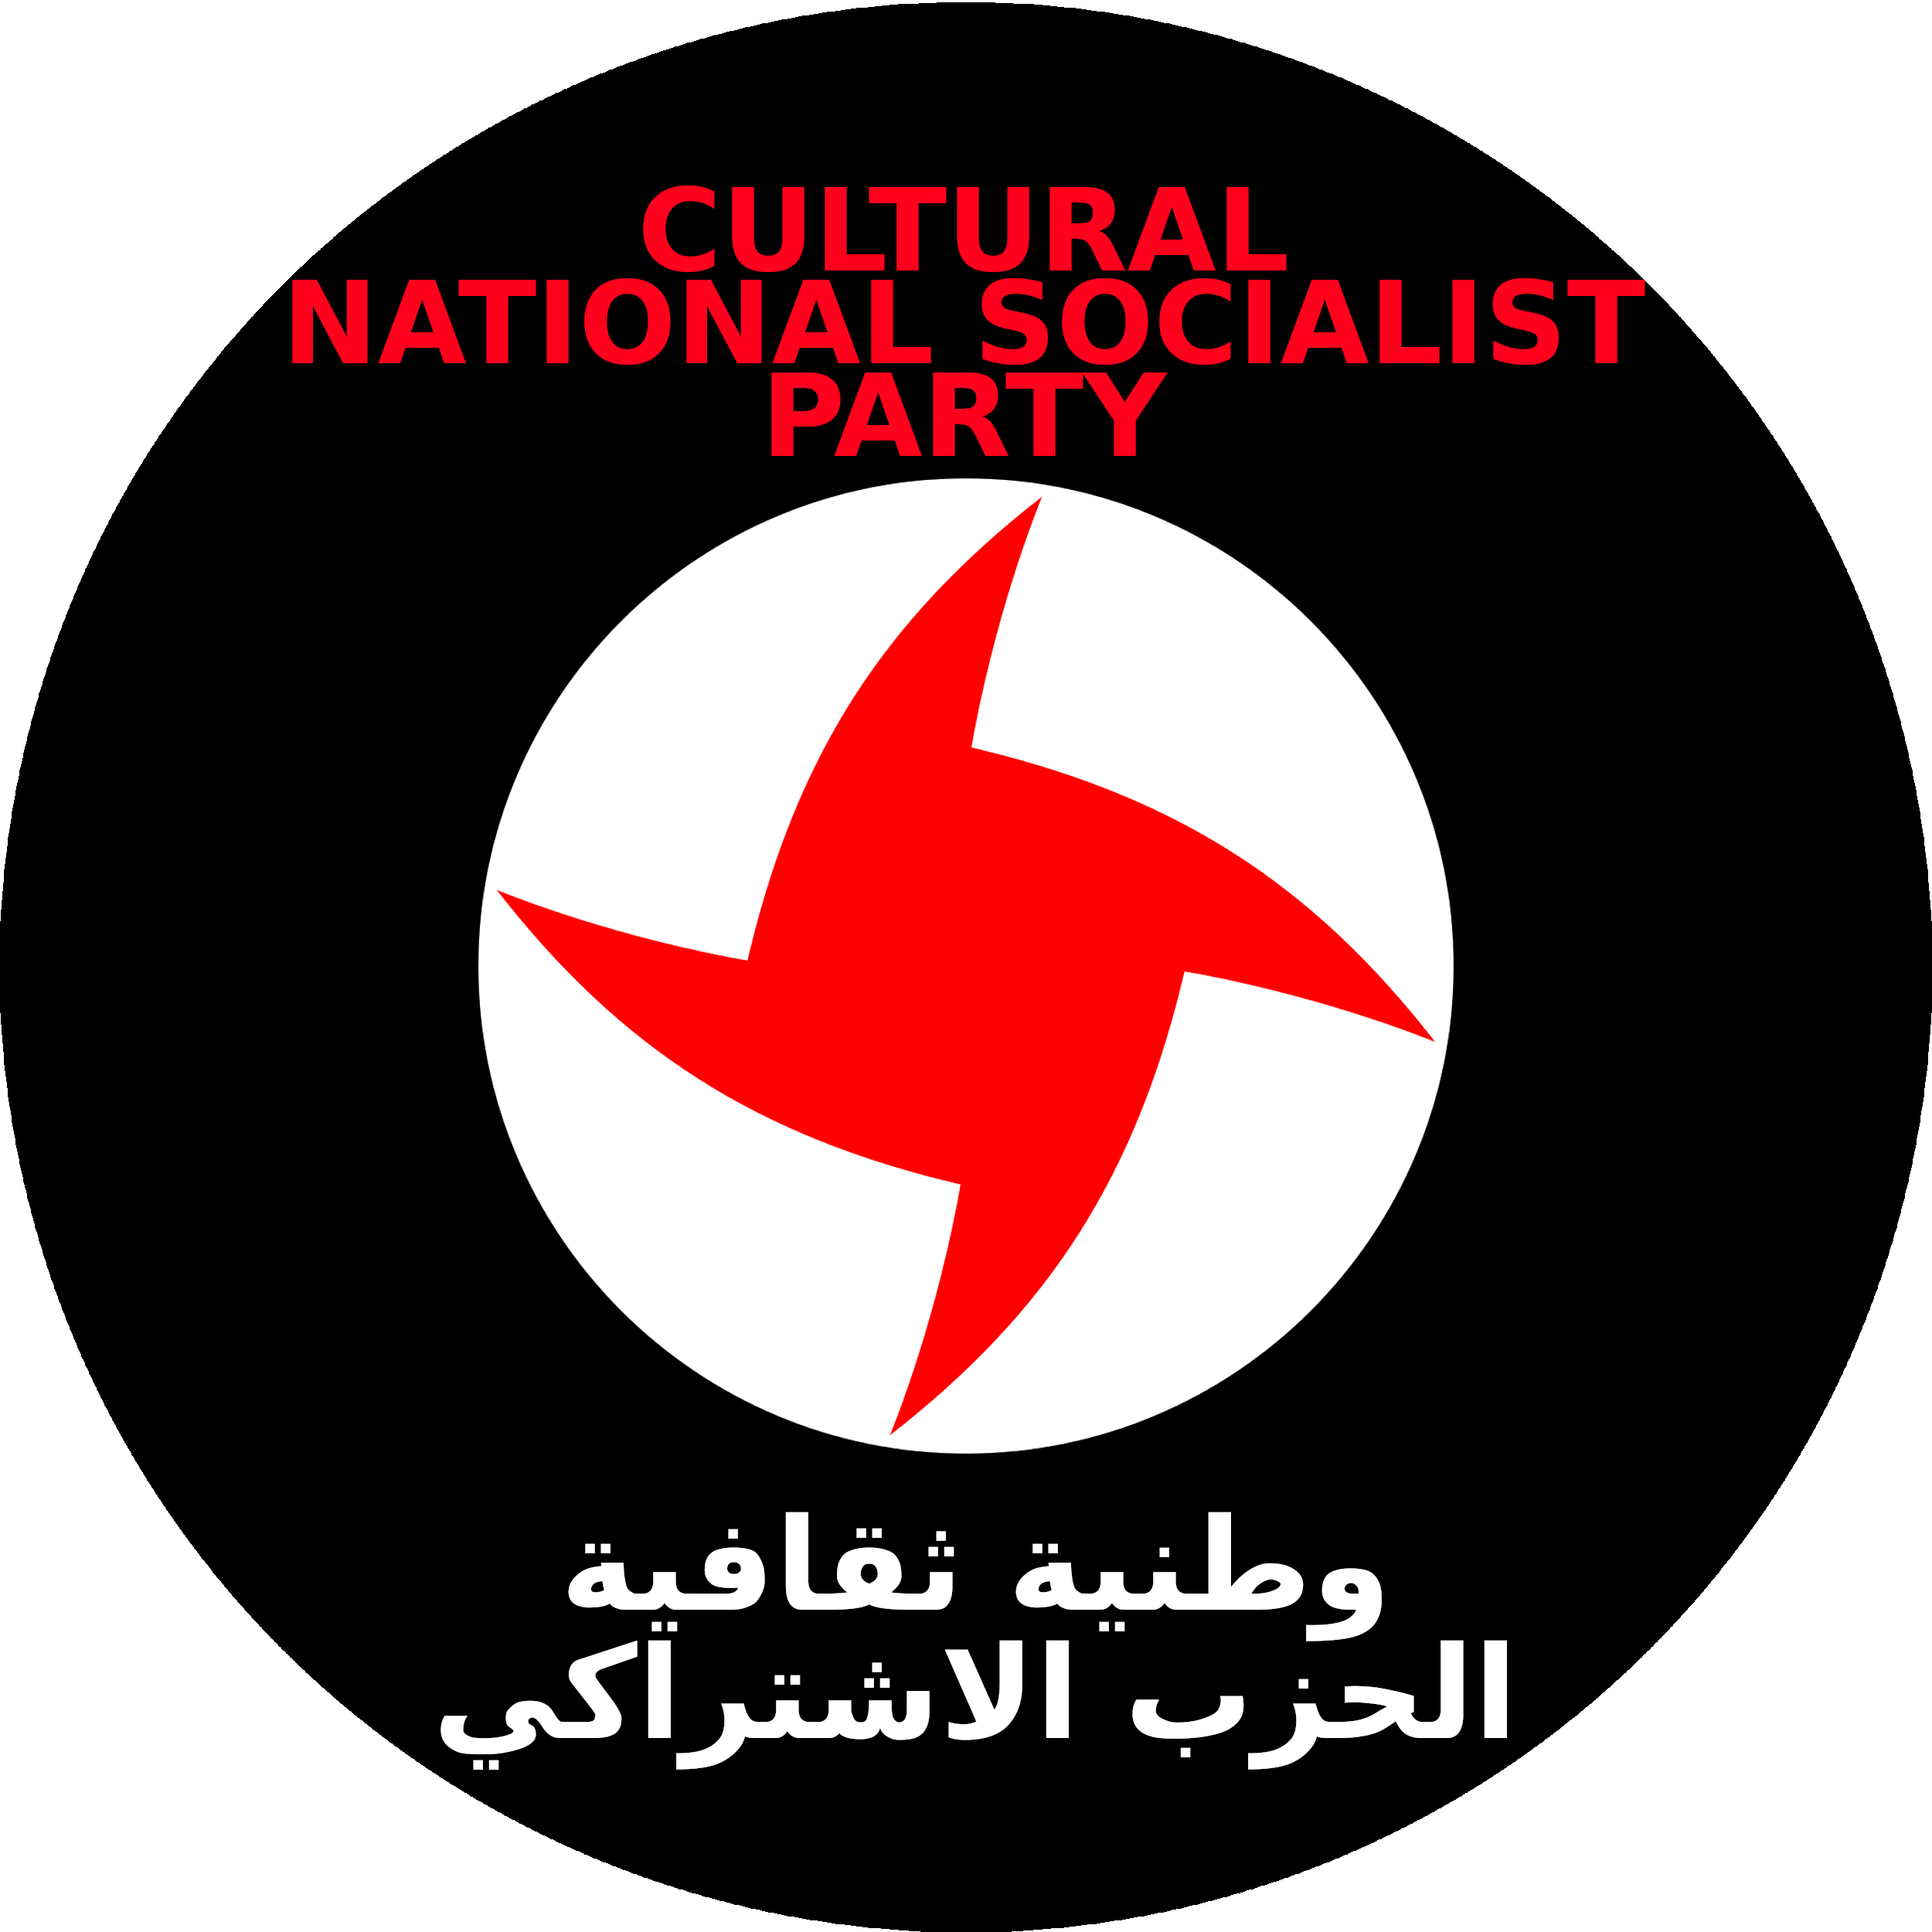 cultural national socialist party 2020